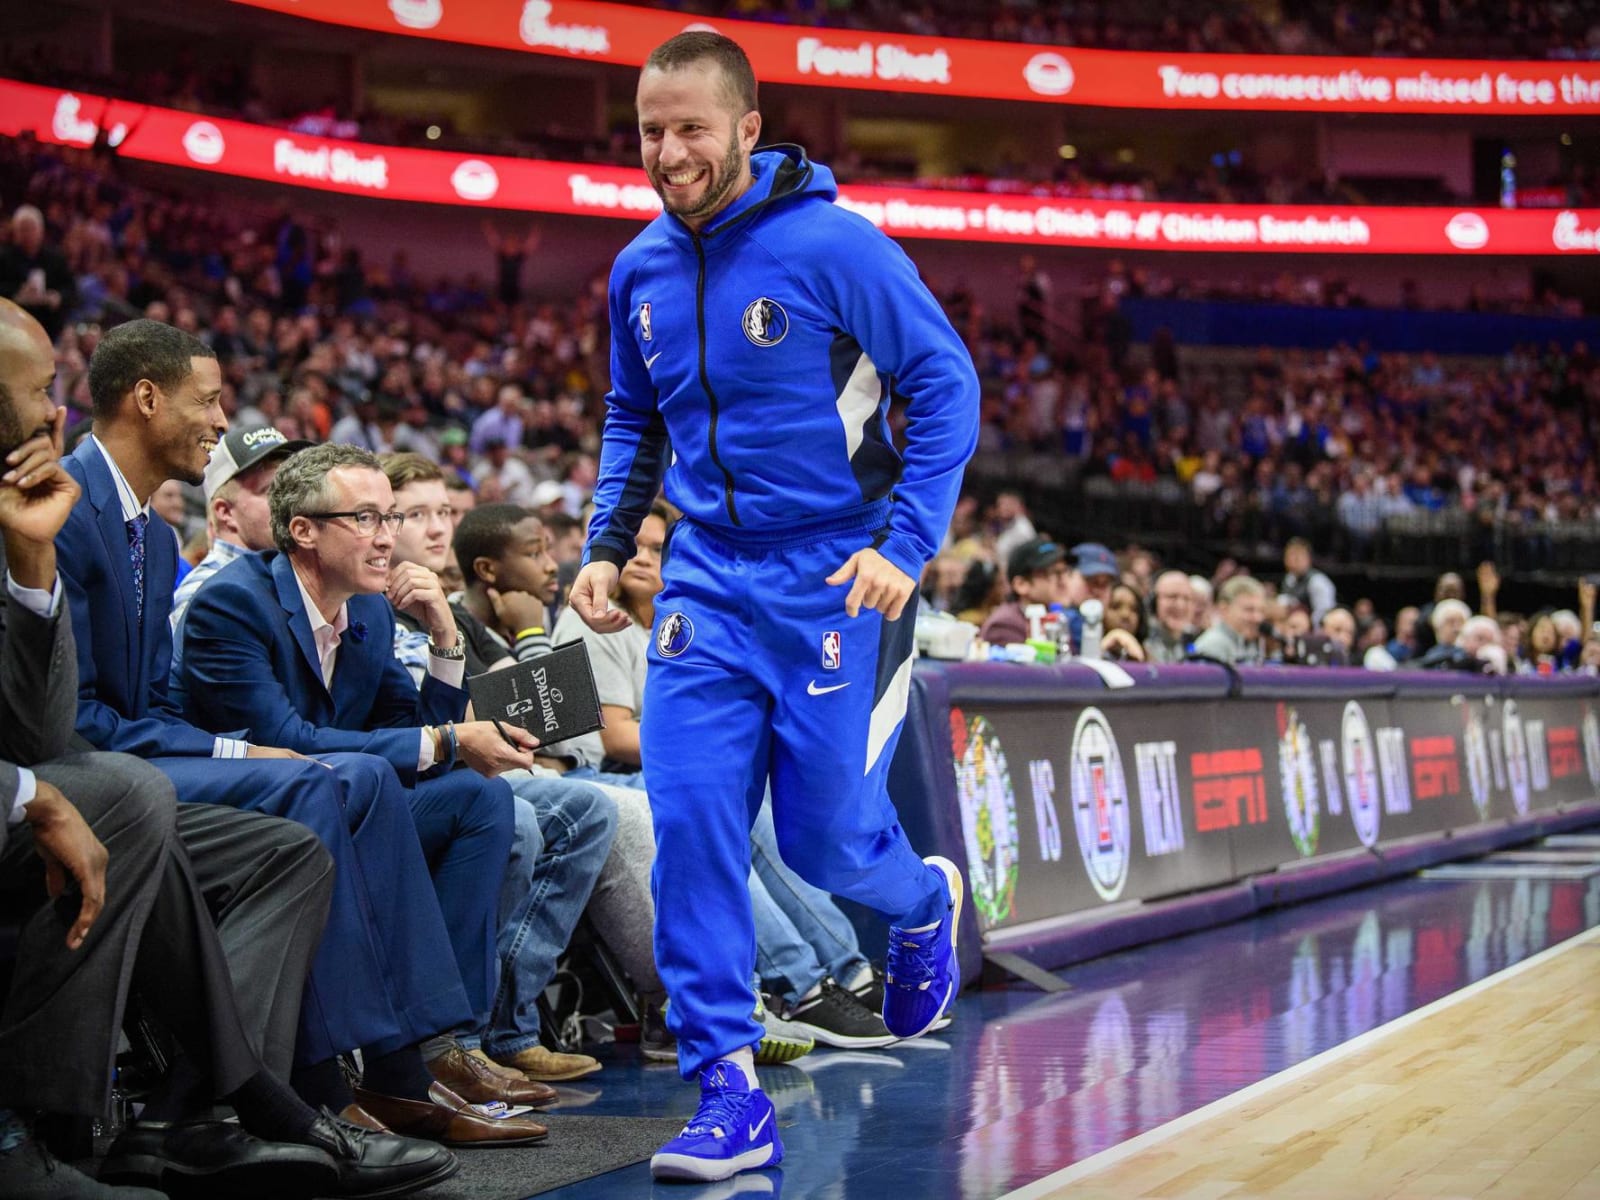 J.J. Barea wants to stay in Dallas, but choice may be hard - NBC Sports